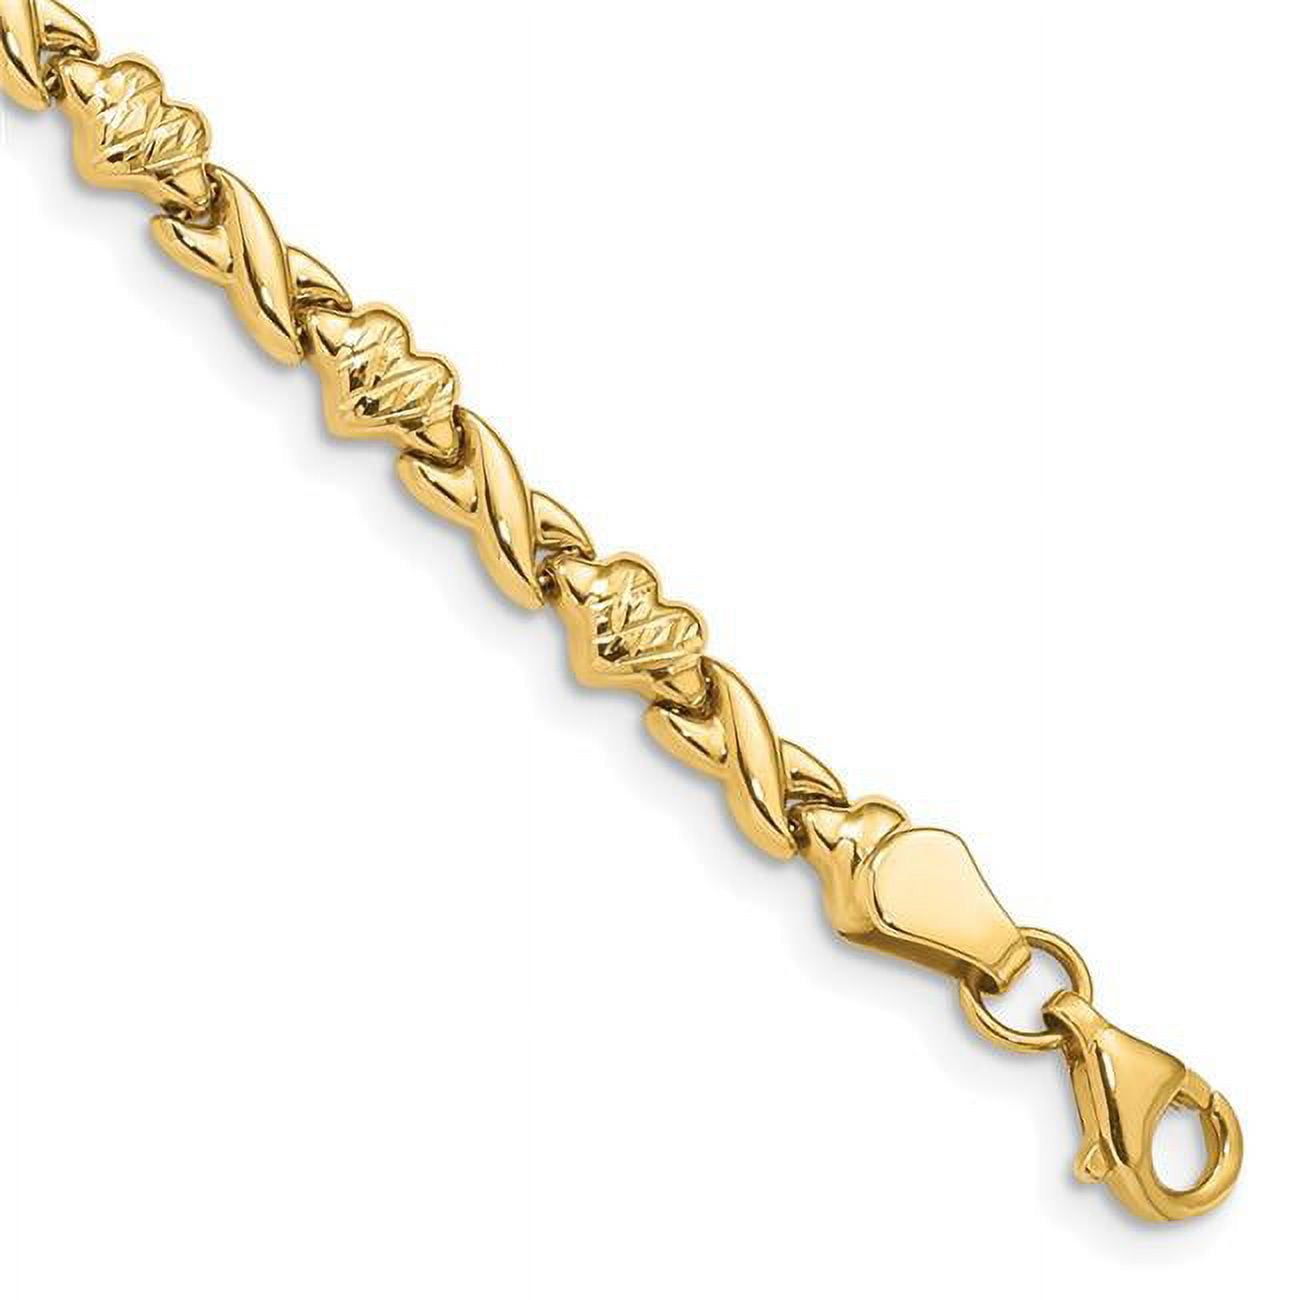 Gold Chain Cuff Bracelet | Classy Women Collection